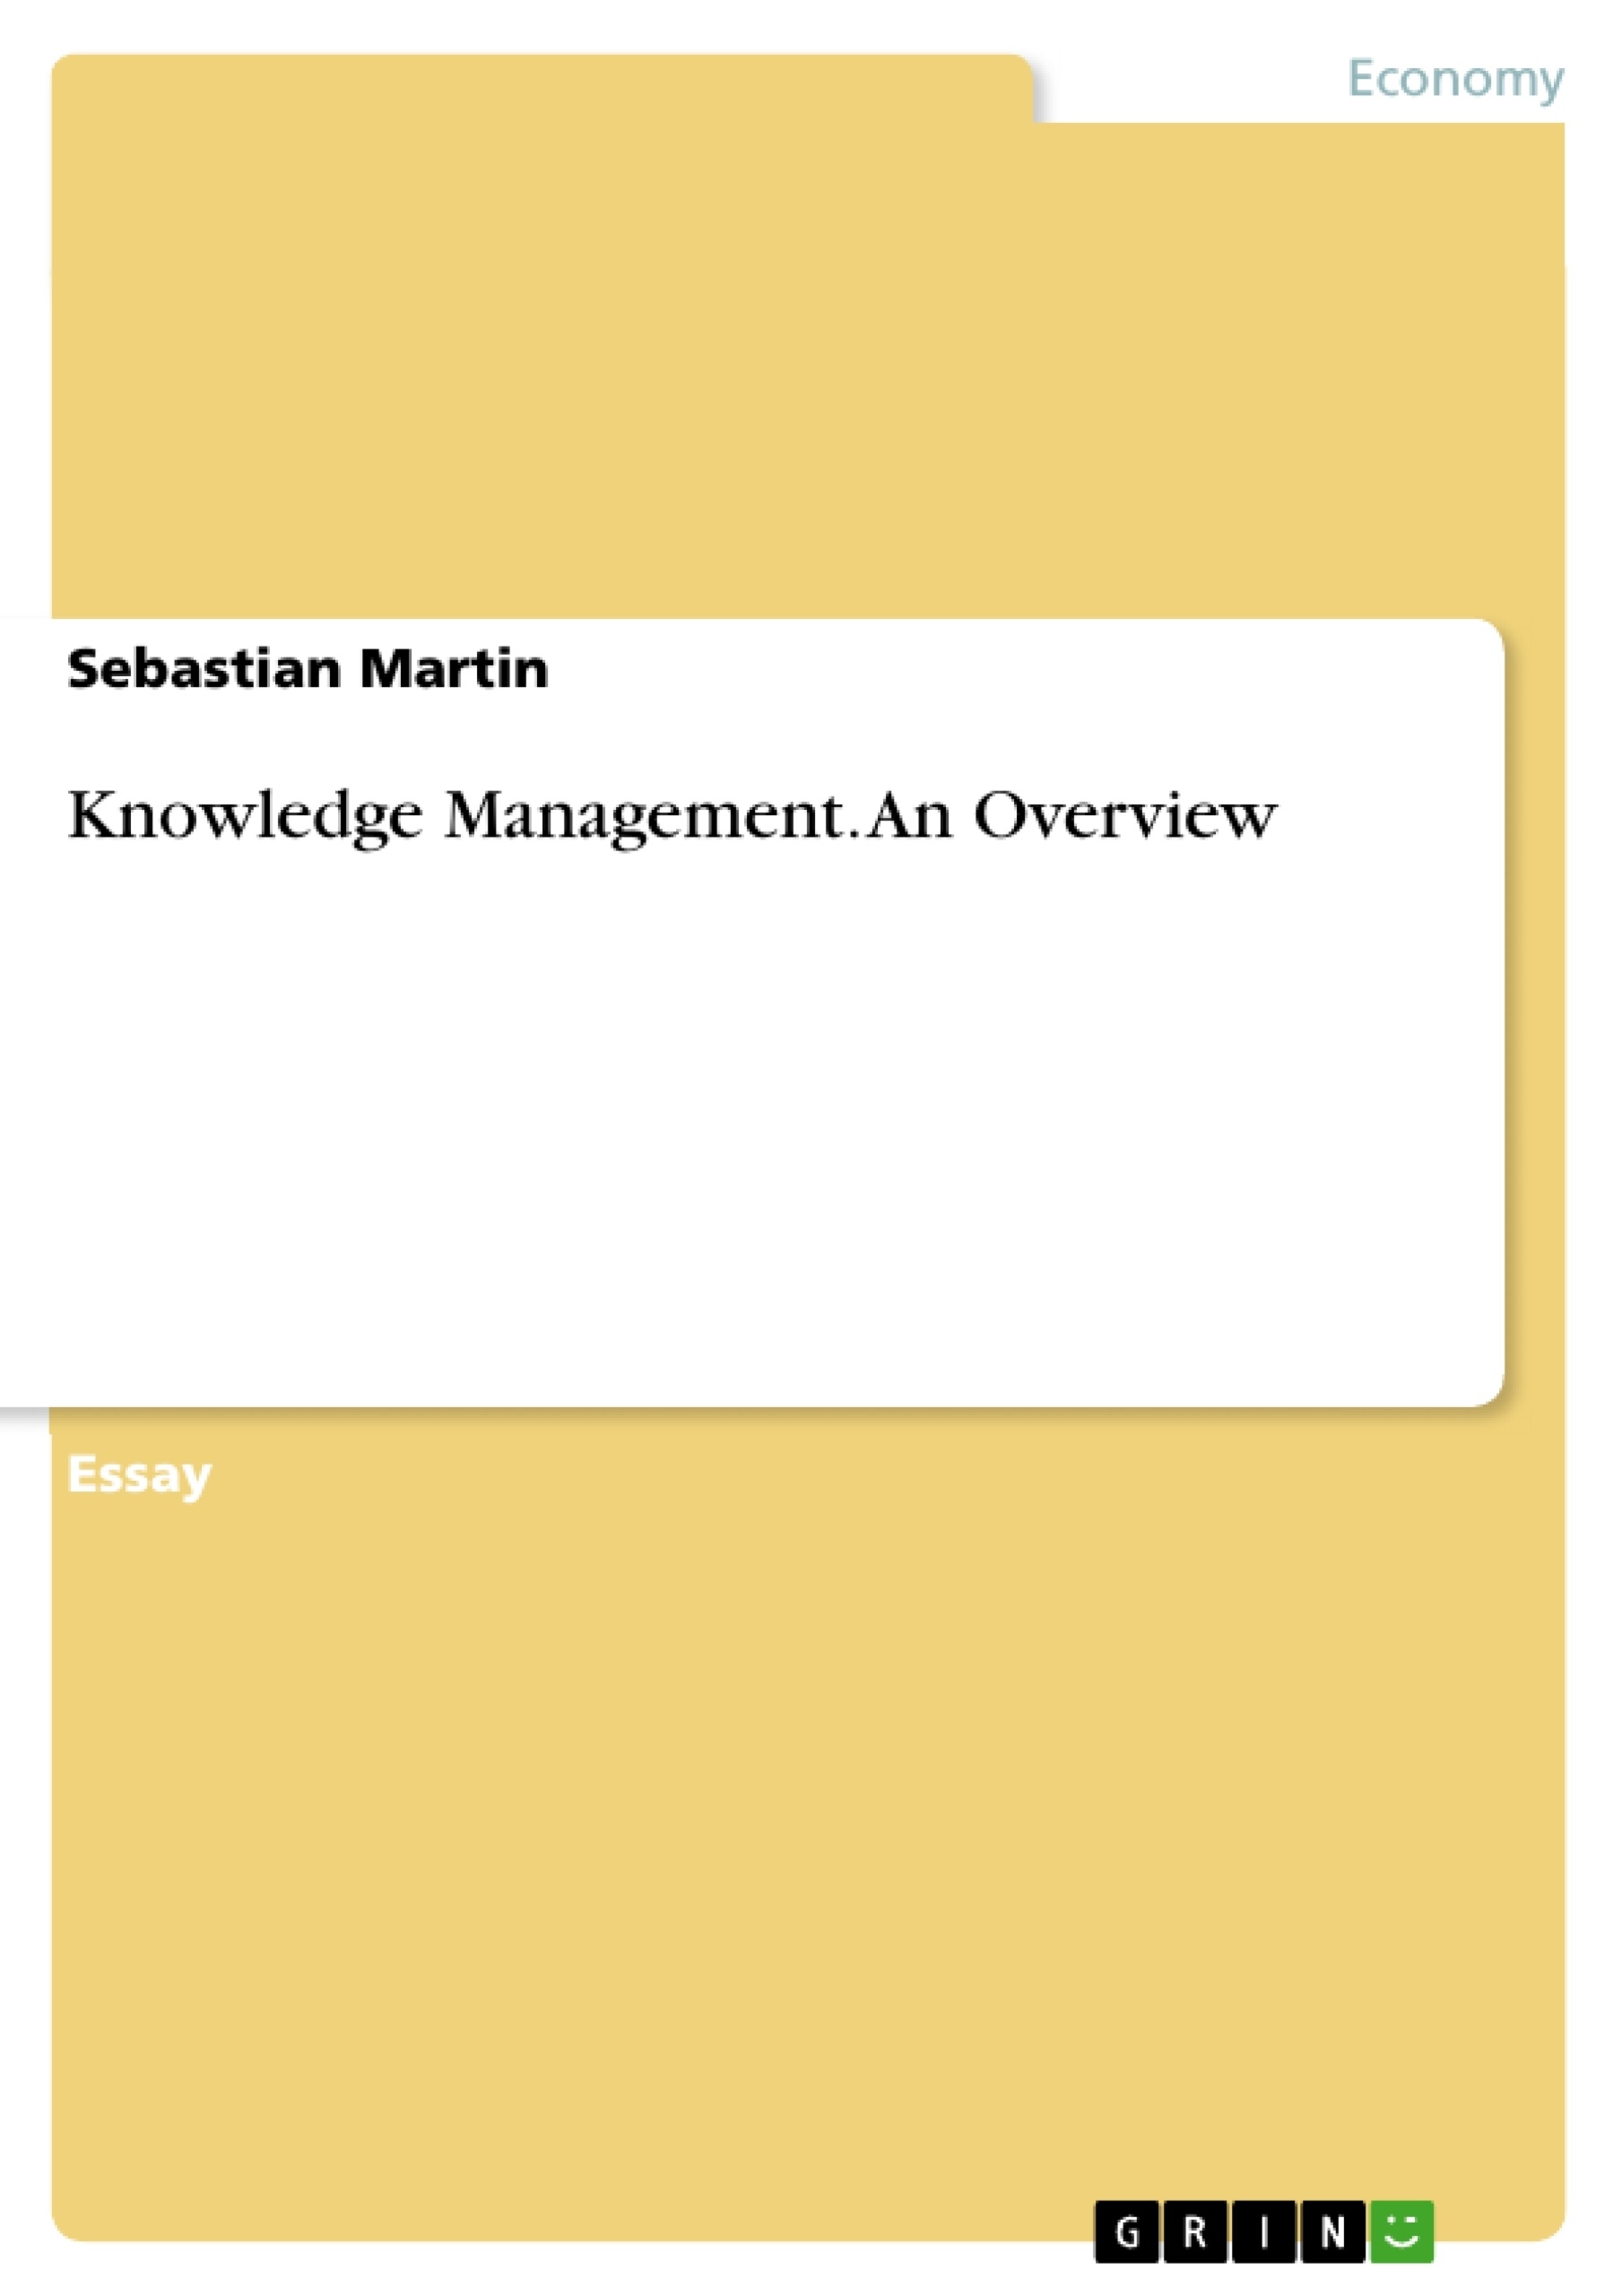 Title: Knowledge Management. An Overview